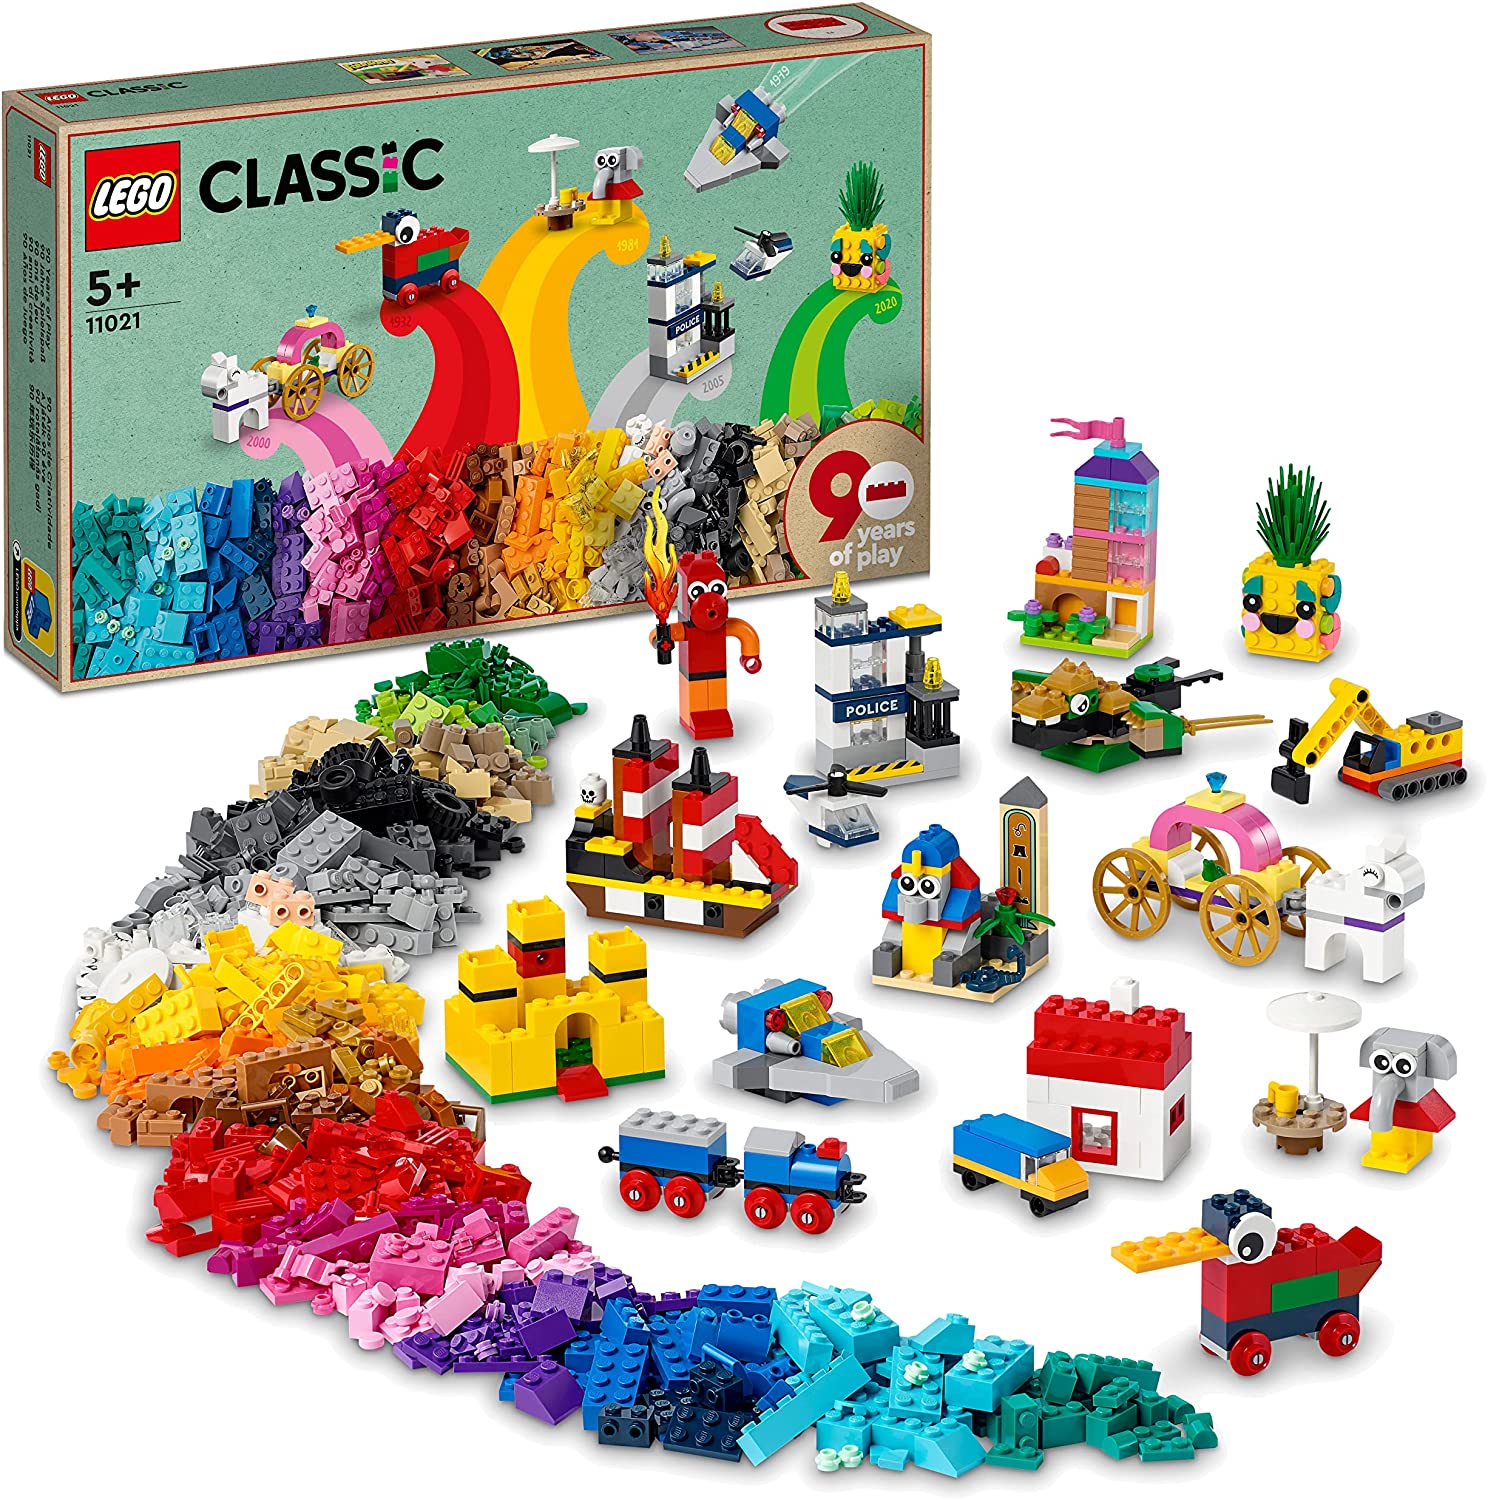 LEGO 11021 Classic 90 Year Fun Set, Building Blocks Box with 15 Mini Models of Legendary LEGO Toys, Includes Train and Castle, Construction Toy